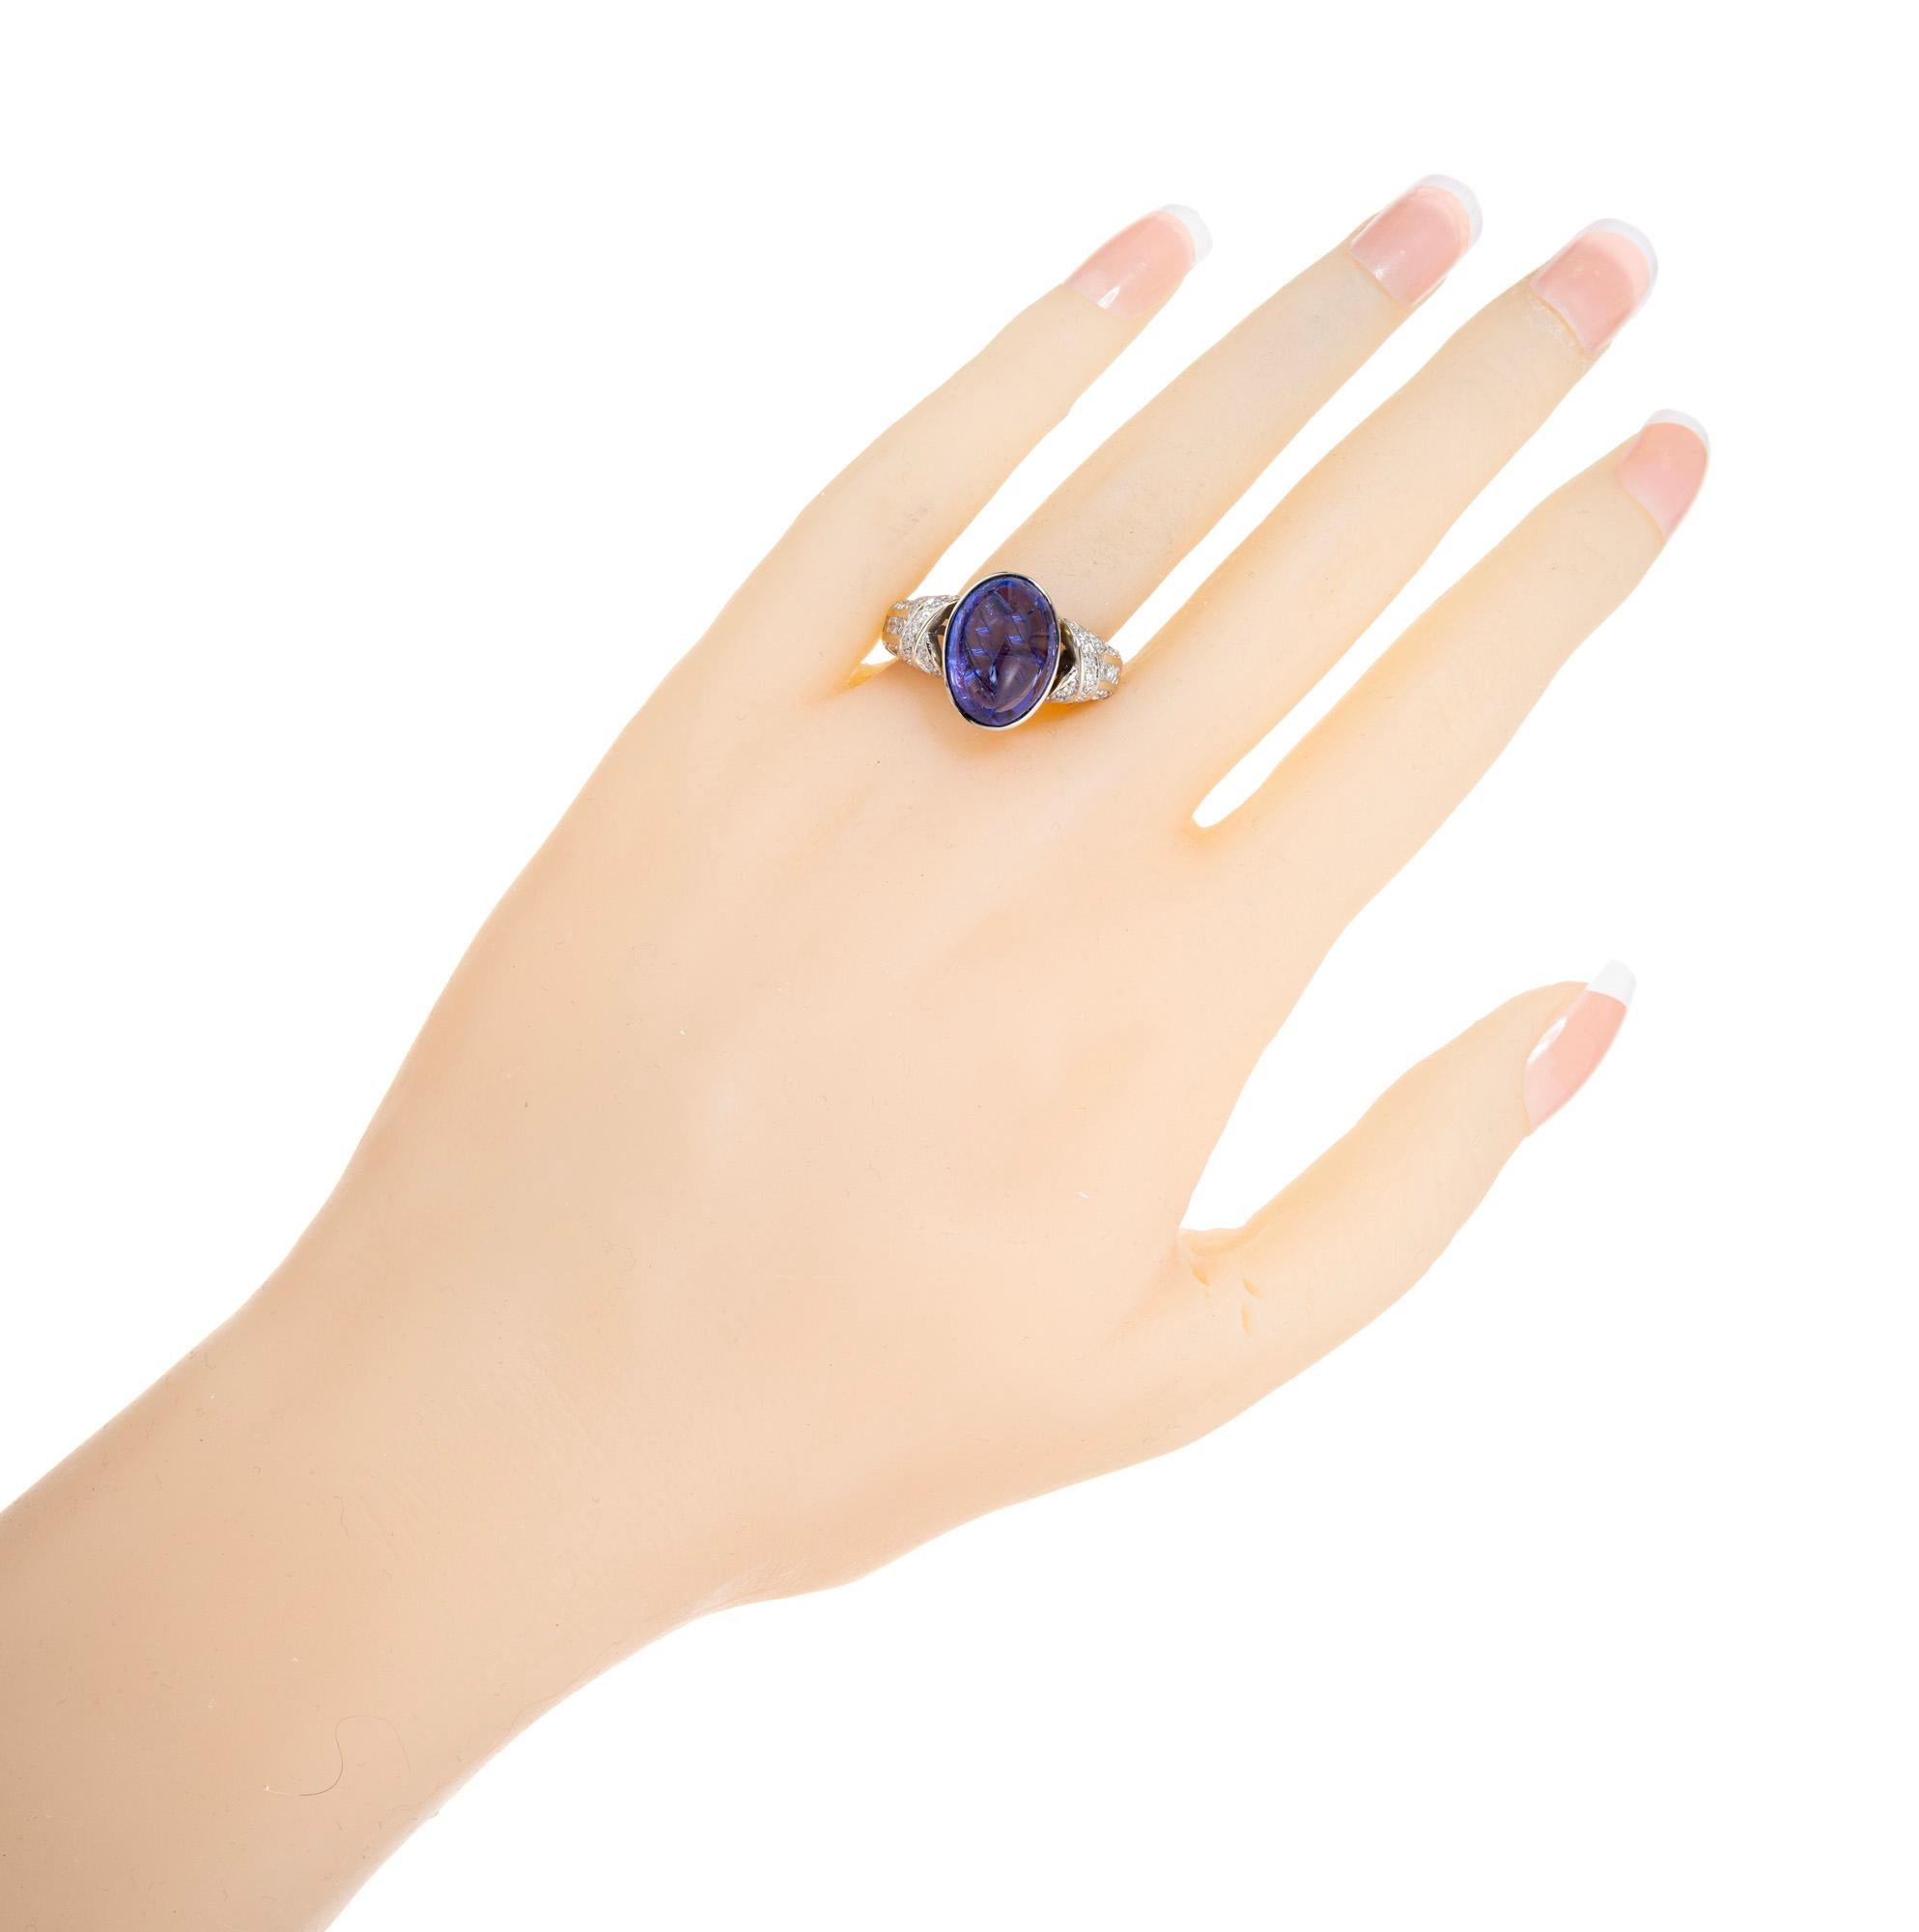 Women's 9.88 Carat Oval Cabochon Tanzanite Diamond Gold Engagement Ring For Sale